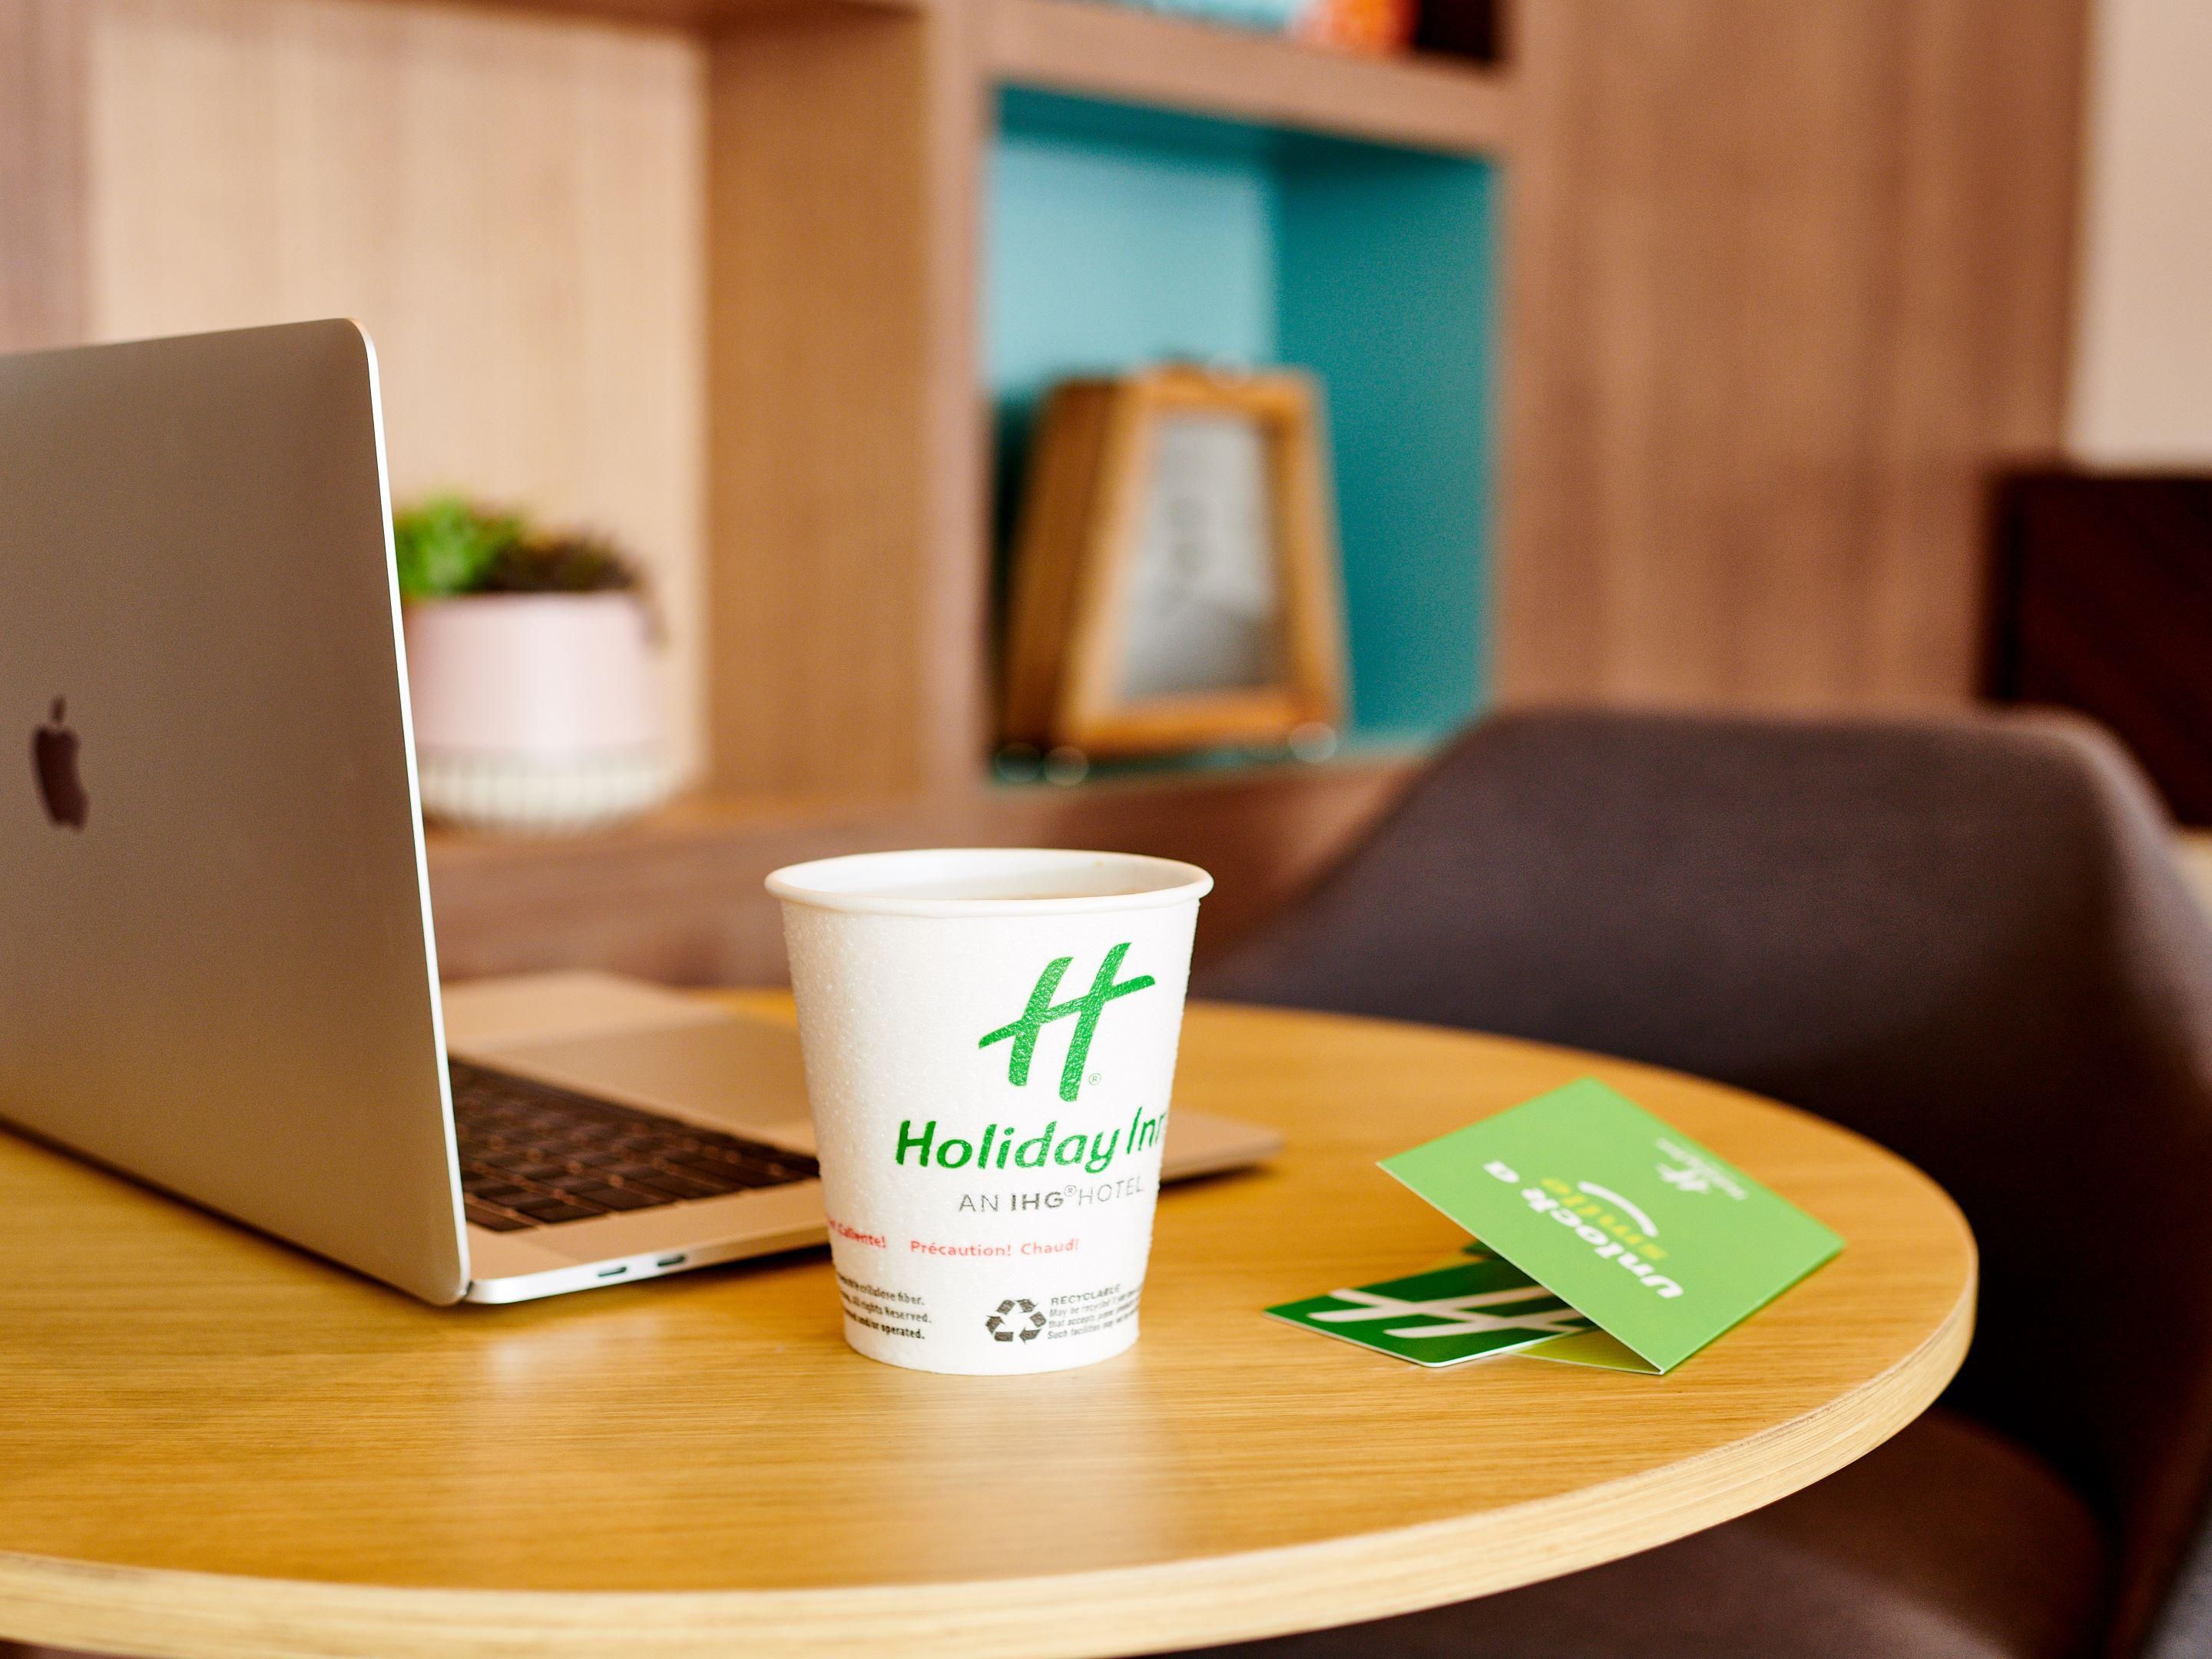 Enjoy our complimentary fast and free Wi-Fi to make the most of your time online - at work or play.